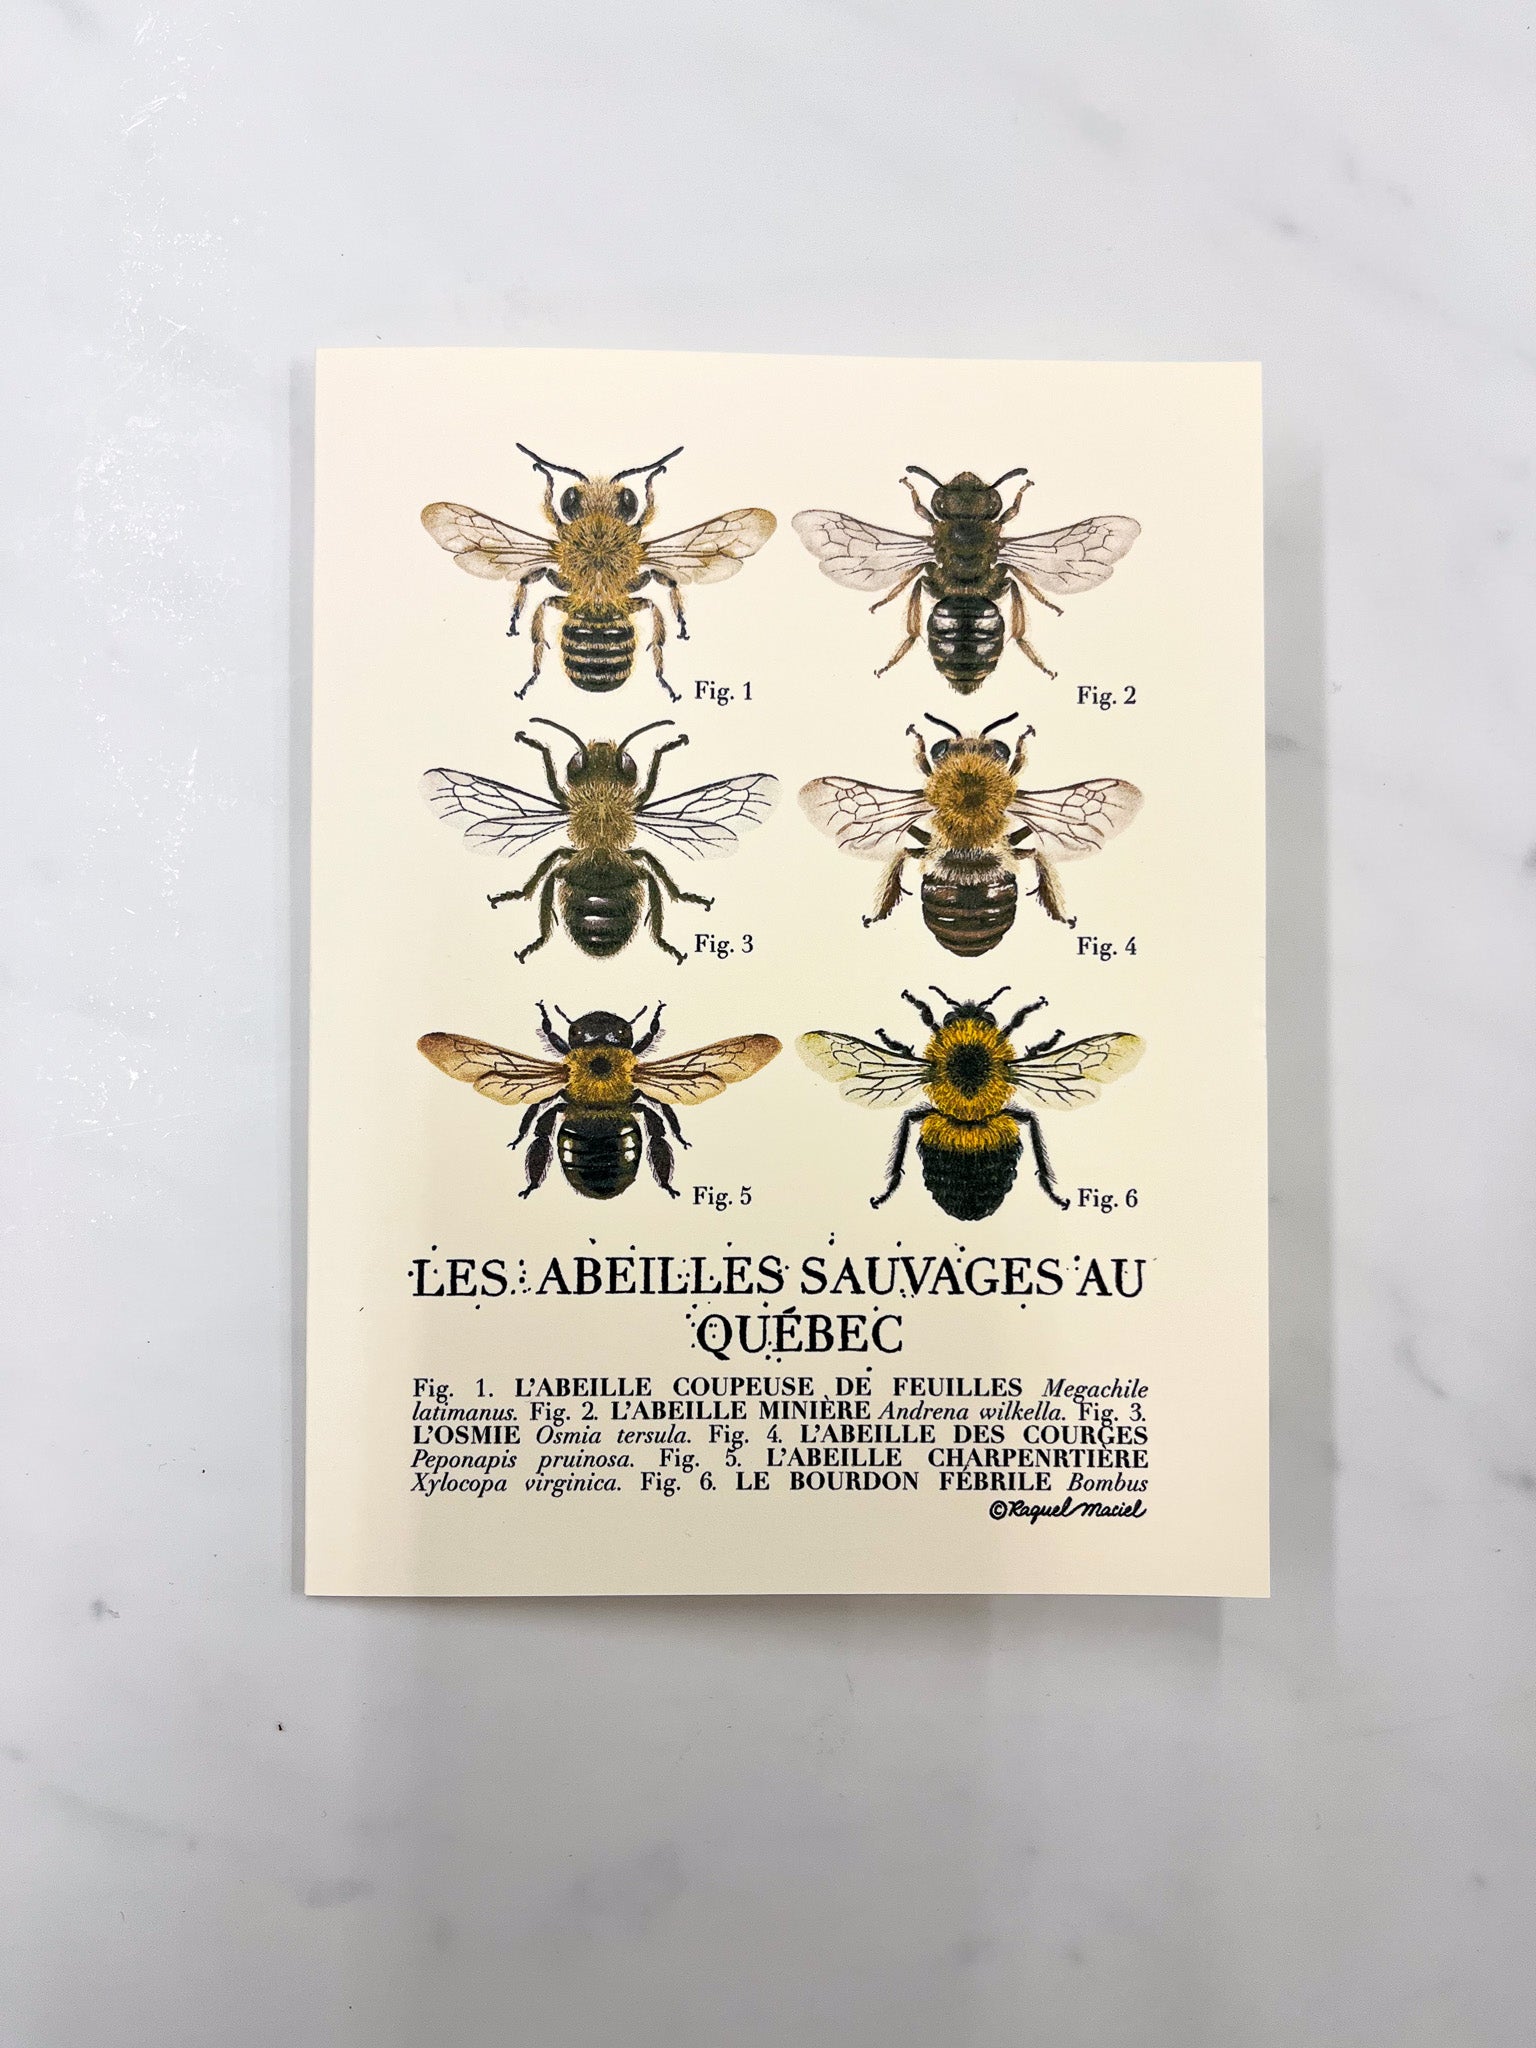 Beige card with "Les Abeilles Sauvages au Quebec" along with illustrations of 6 different varieties of Quebec bees